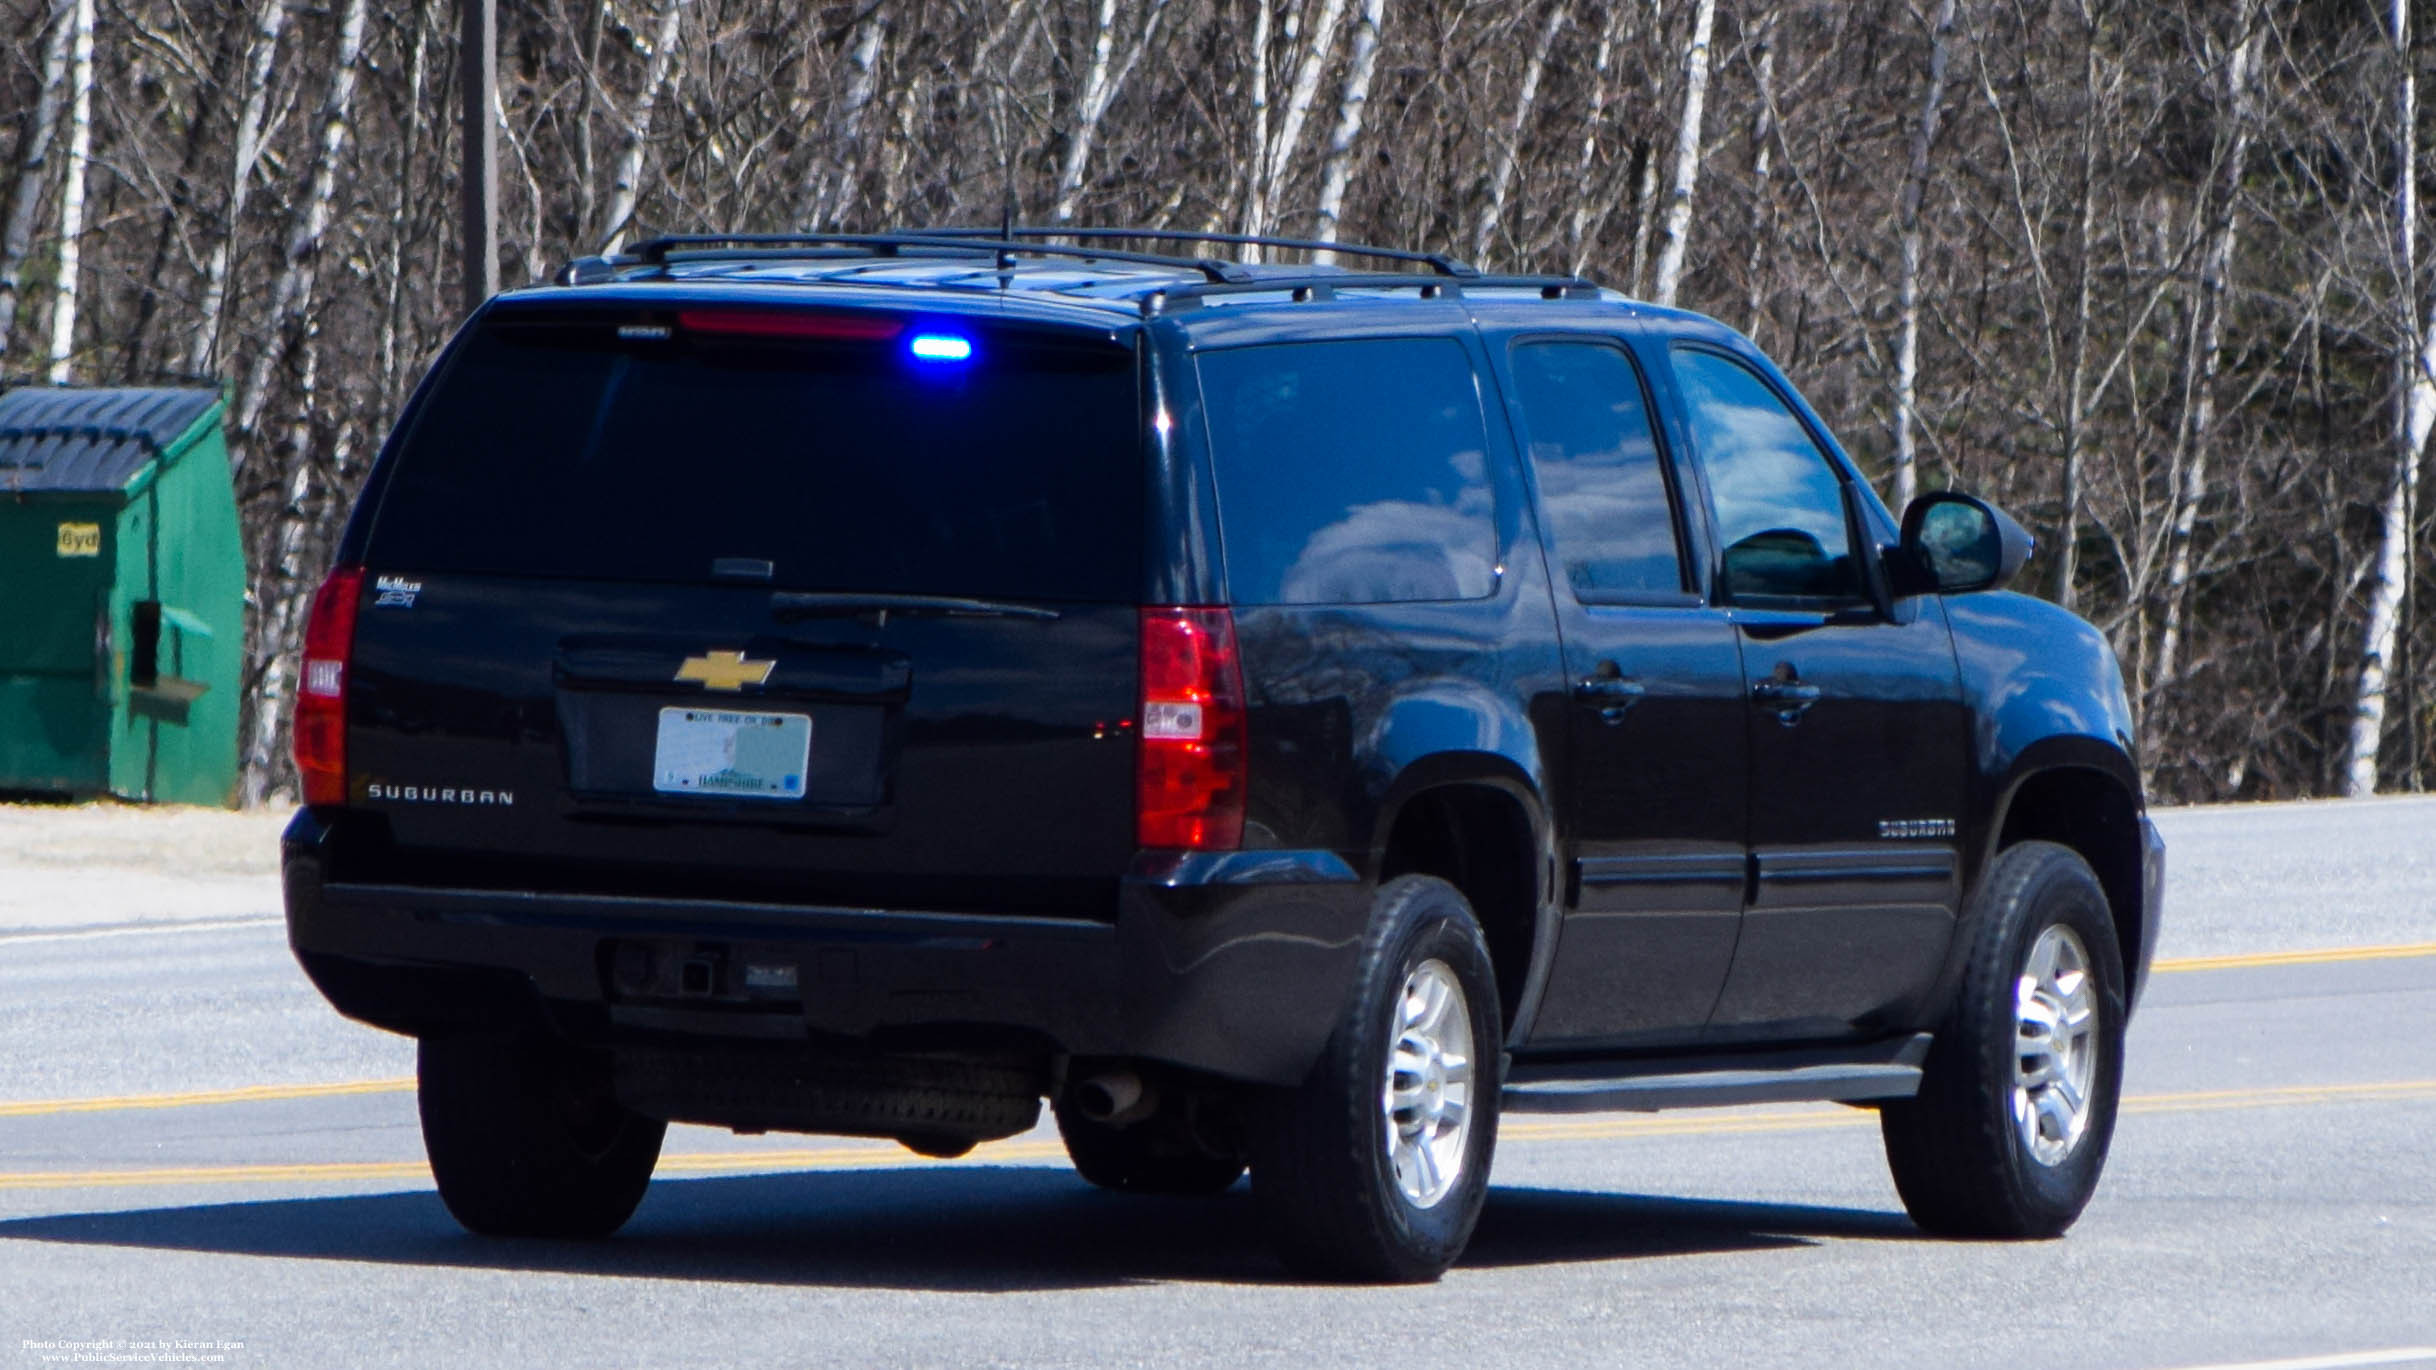 A photo  of New Hampshire State Police
            Unmarked Unit, a 2007-2014 Chevrolet Suburban             taken by Kieran Egan